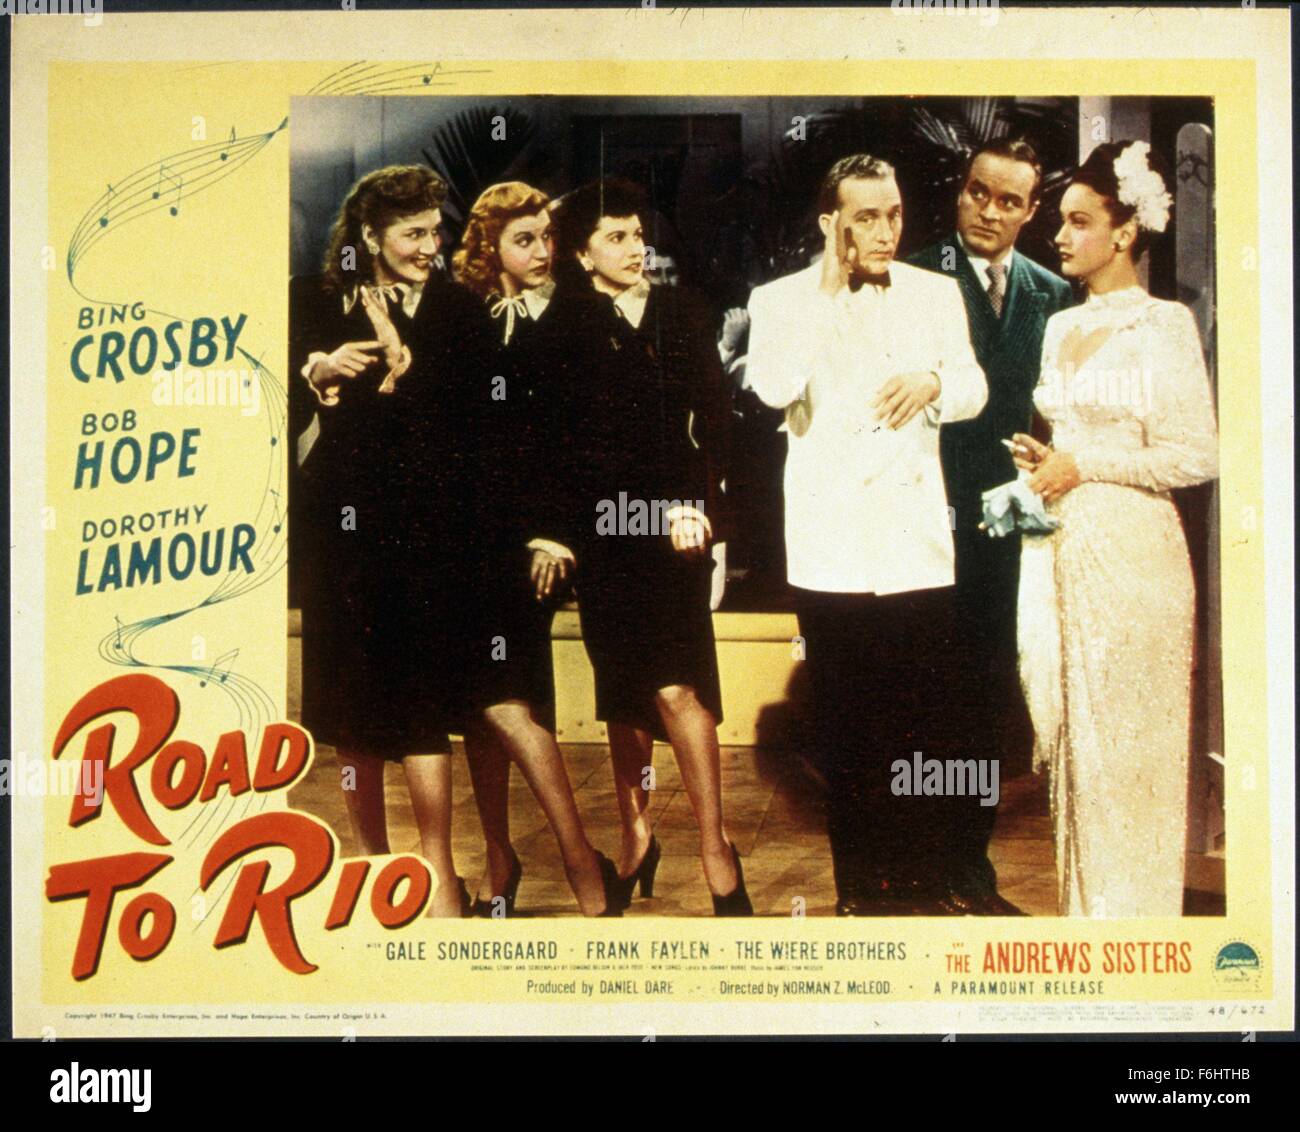 1947, Film Title: ROAD TO RIO, Director: NORMAN Z McLEOD, Studio: PARAMOUNT, Pictured: ANDREWS SISTERS, LAVERNE ANDREWS, MAXINE ANDREWS, PATTY ANDREWS, BING CROSBY, BOB HOPE, DOROTHY LAMOUR. (Credit Image: SNAP) Stock Photo